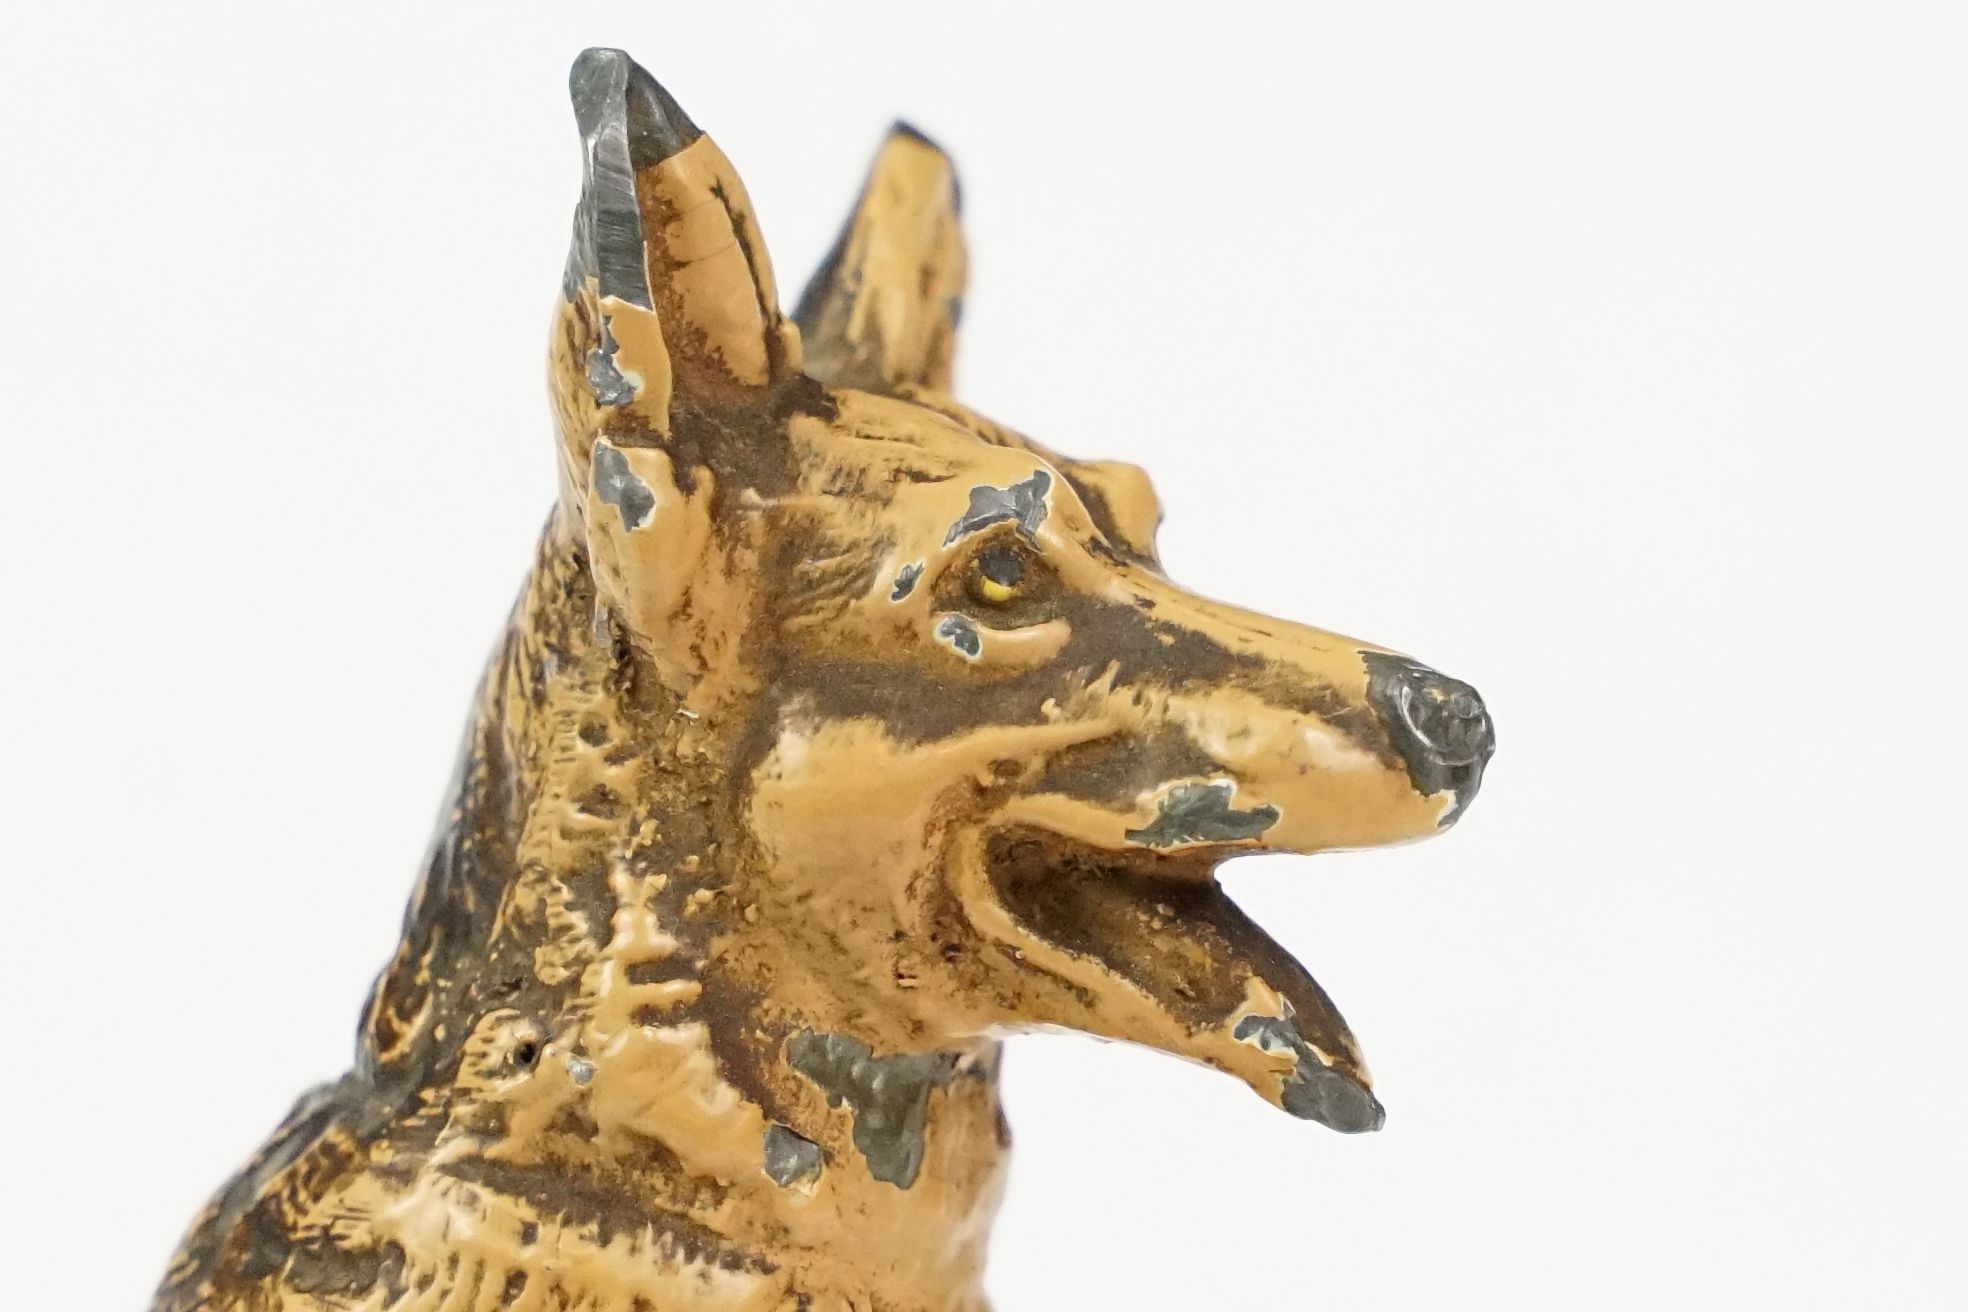 Austrian style Cold Painted Model of a Seated Alsatian / German Shepherd Dog, 3" tall - Image 5 of 6